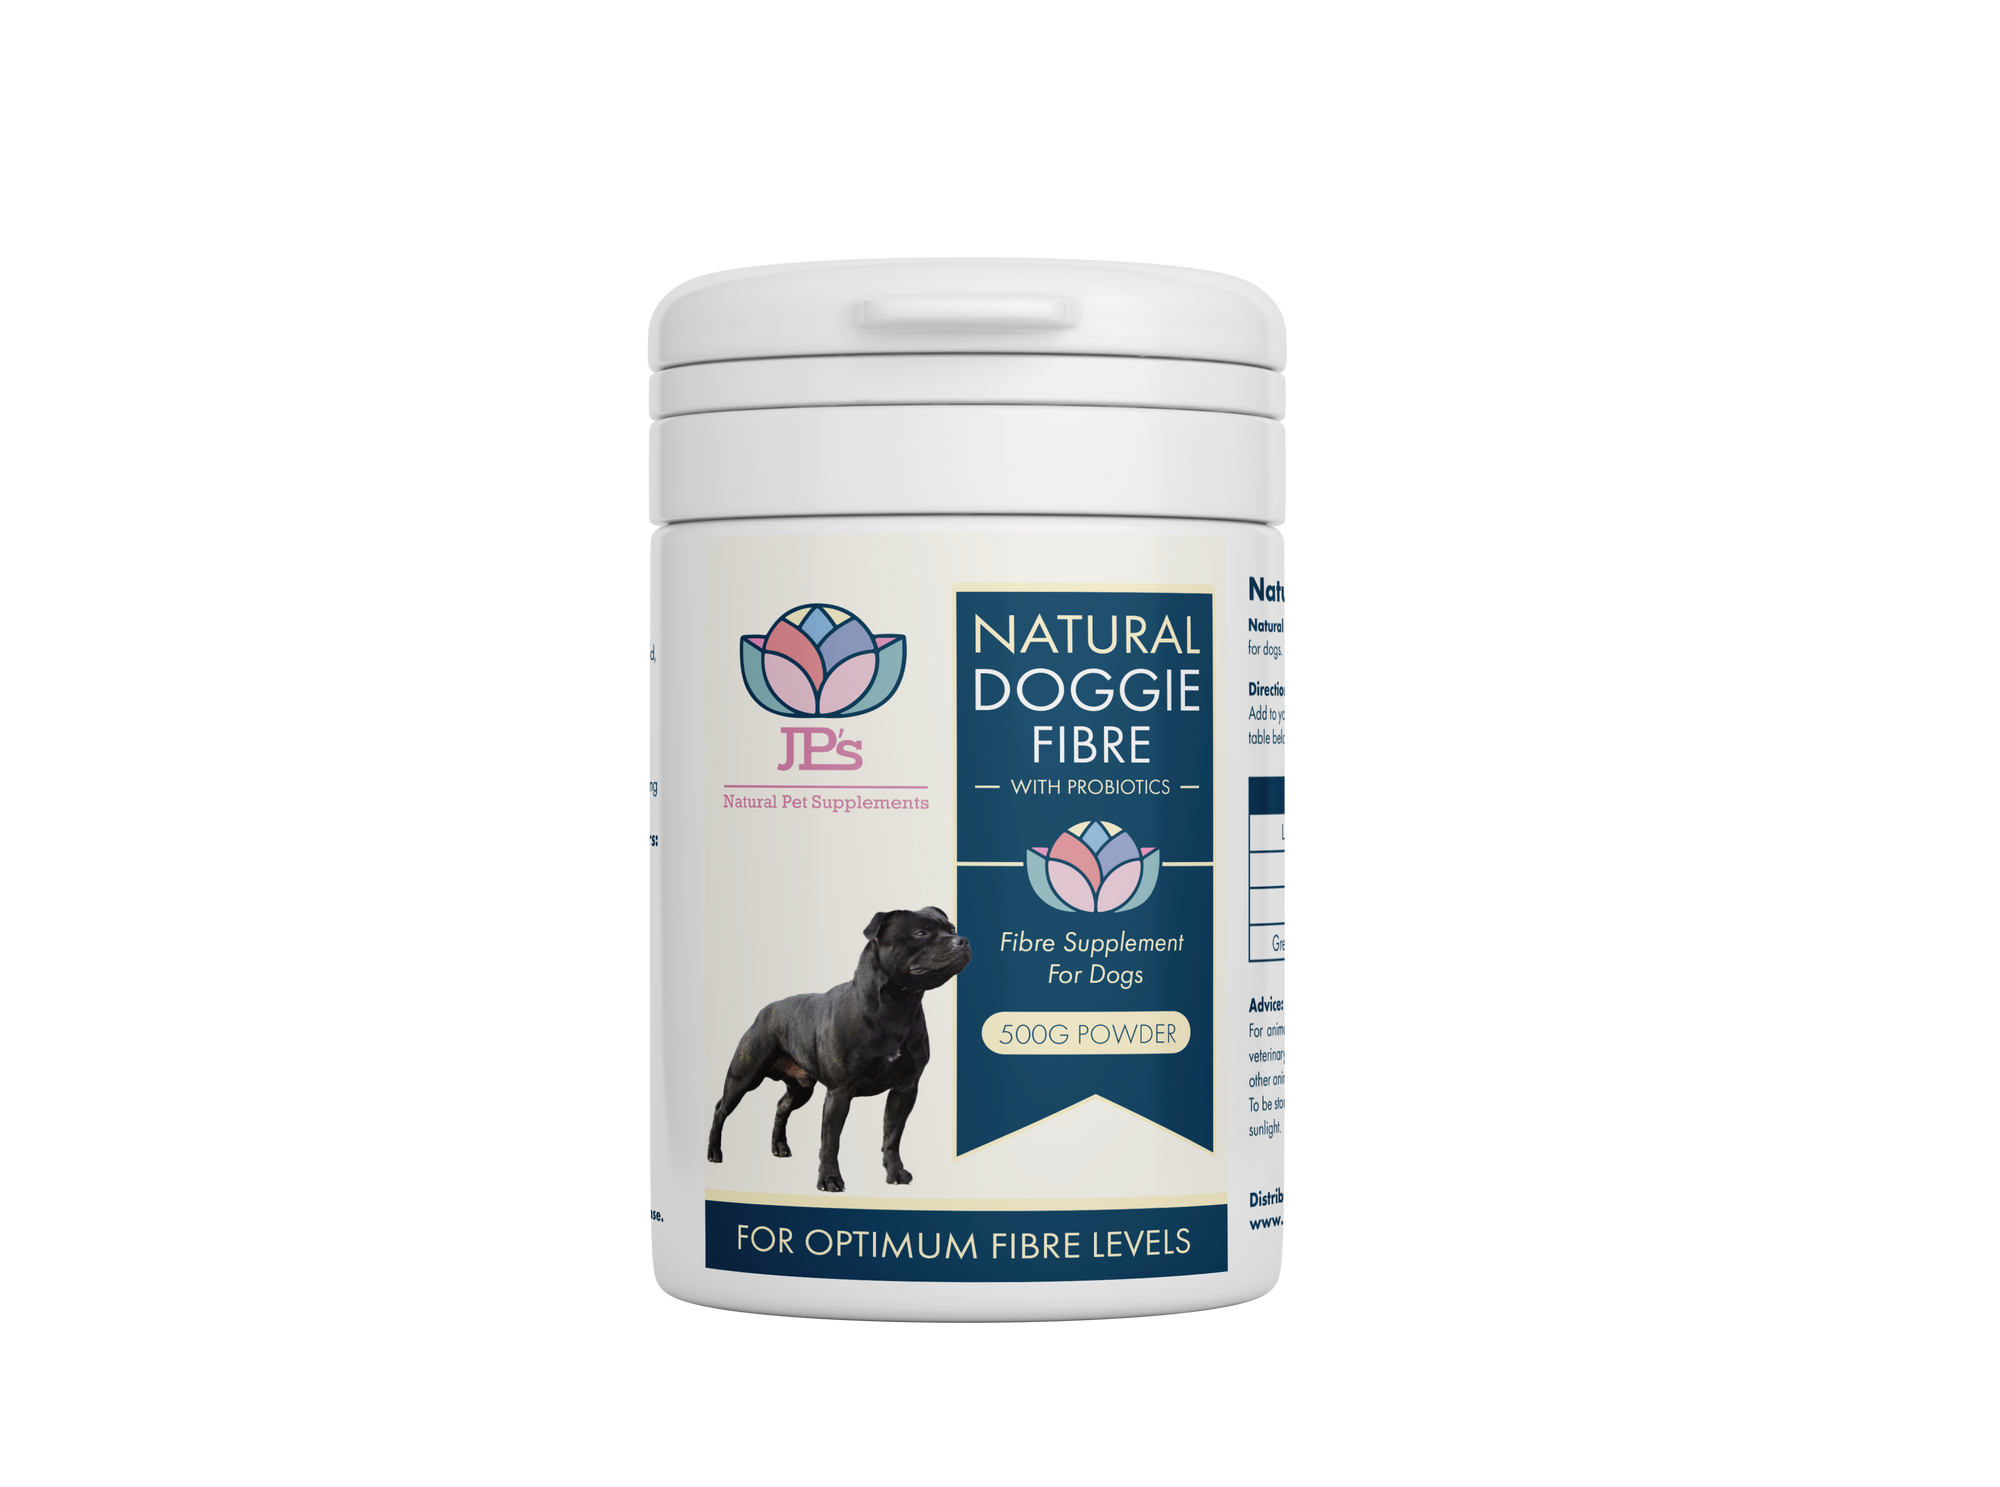 Natural Fibre Supplement with Probiotics for Dogs